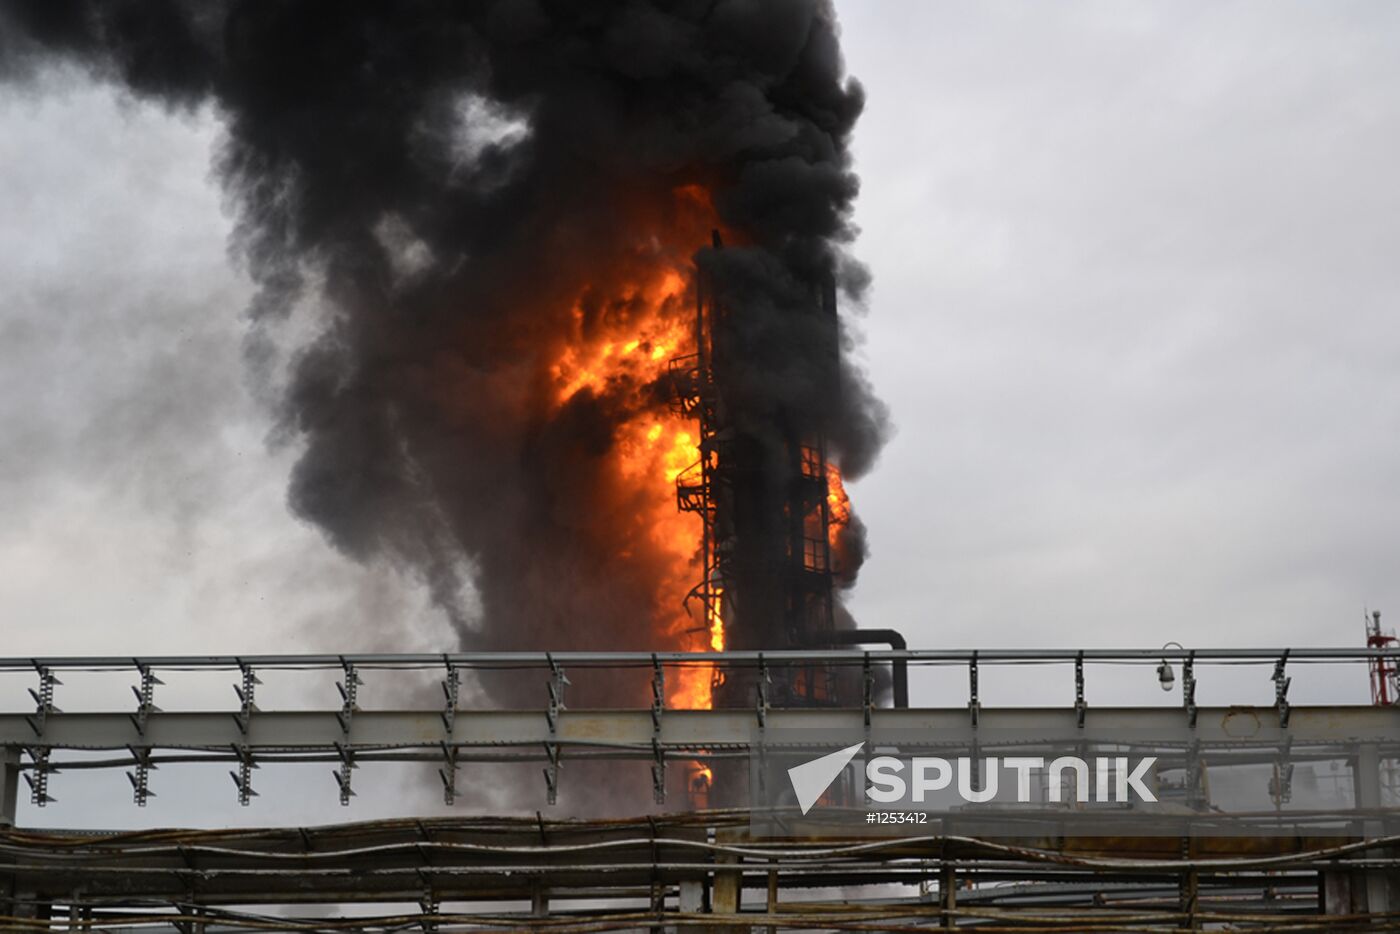 Oil processing plant on fire in Saratov